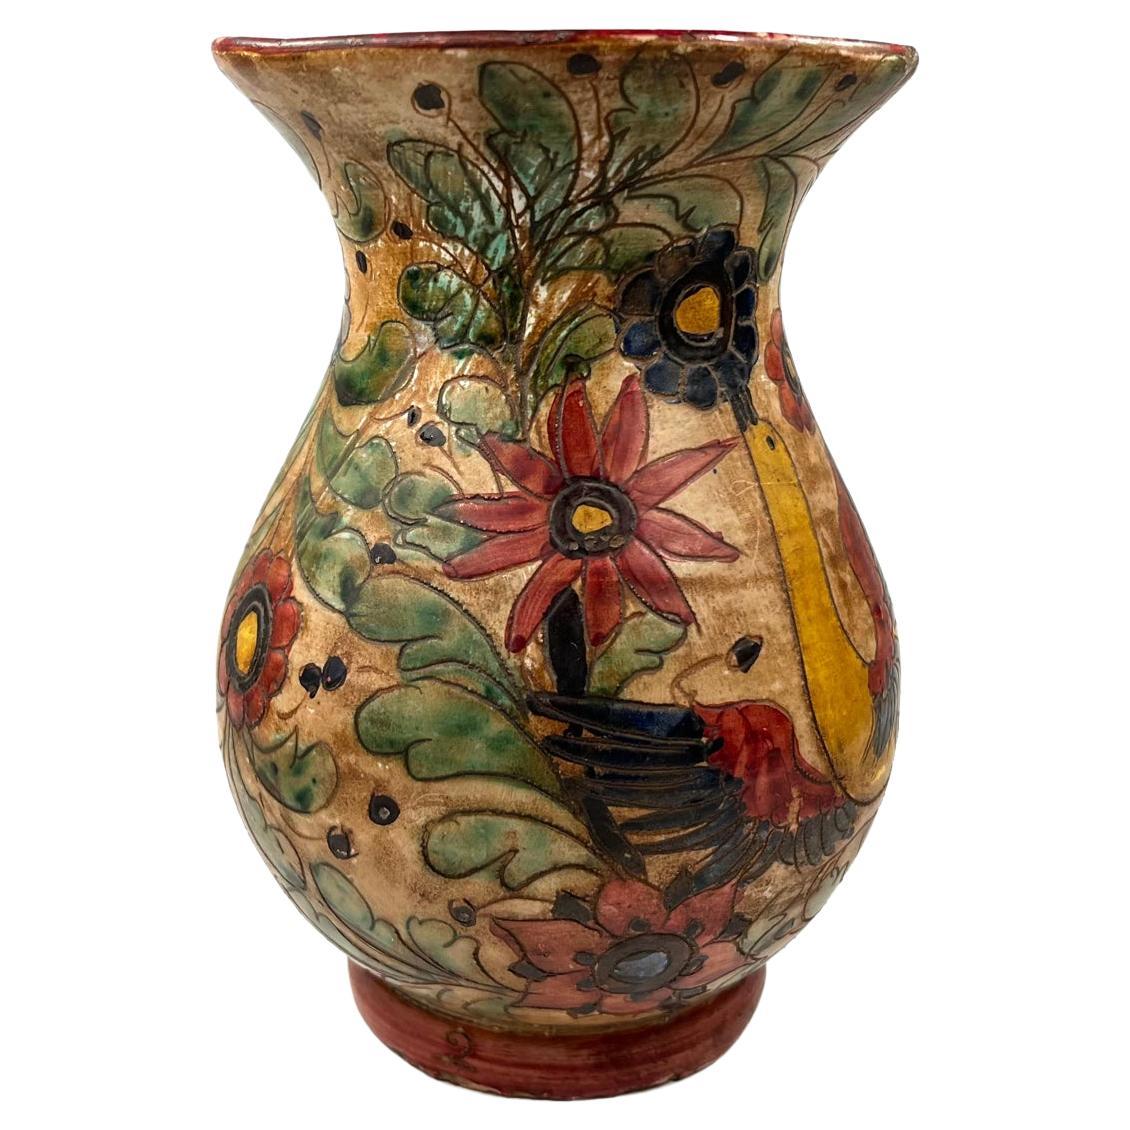  Italian Hand Painted Pottery Vase with Flowers and Birds Circa 19th C. For Sale